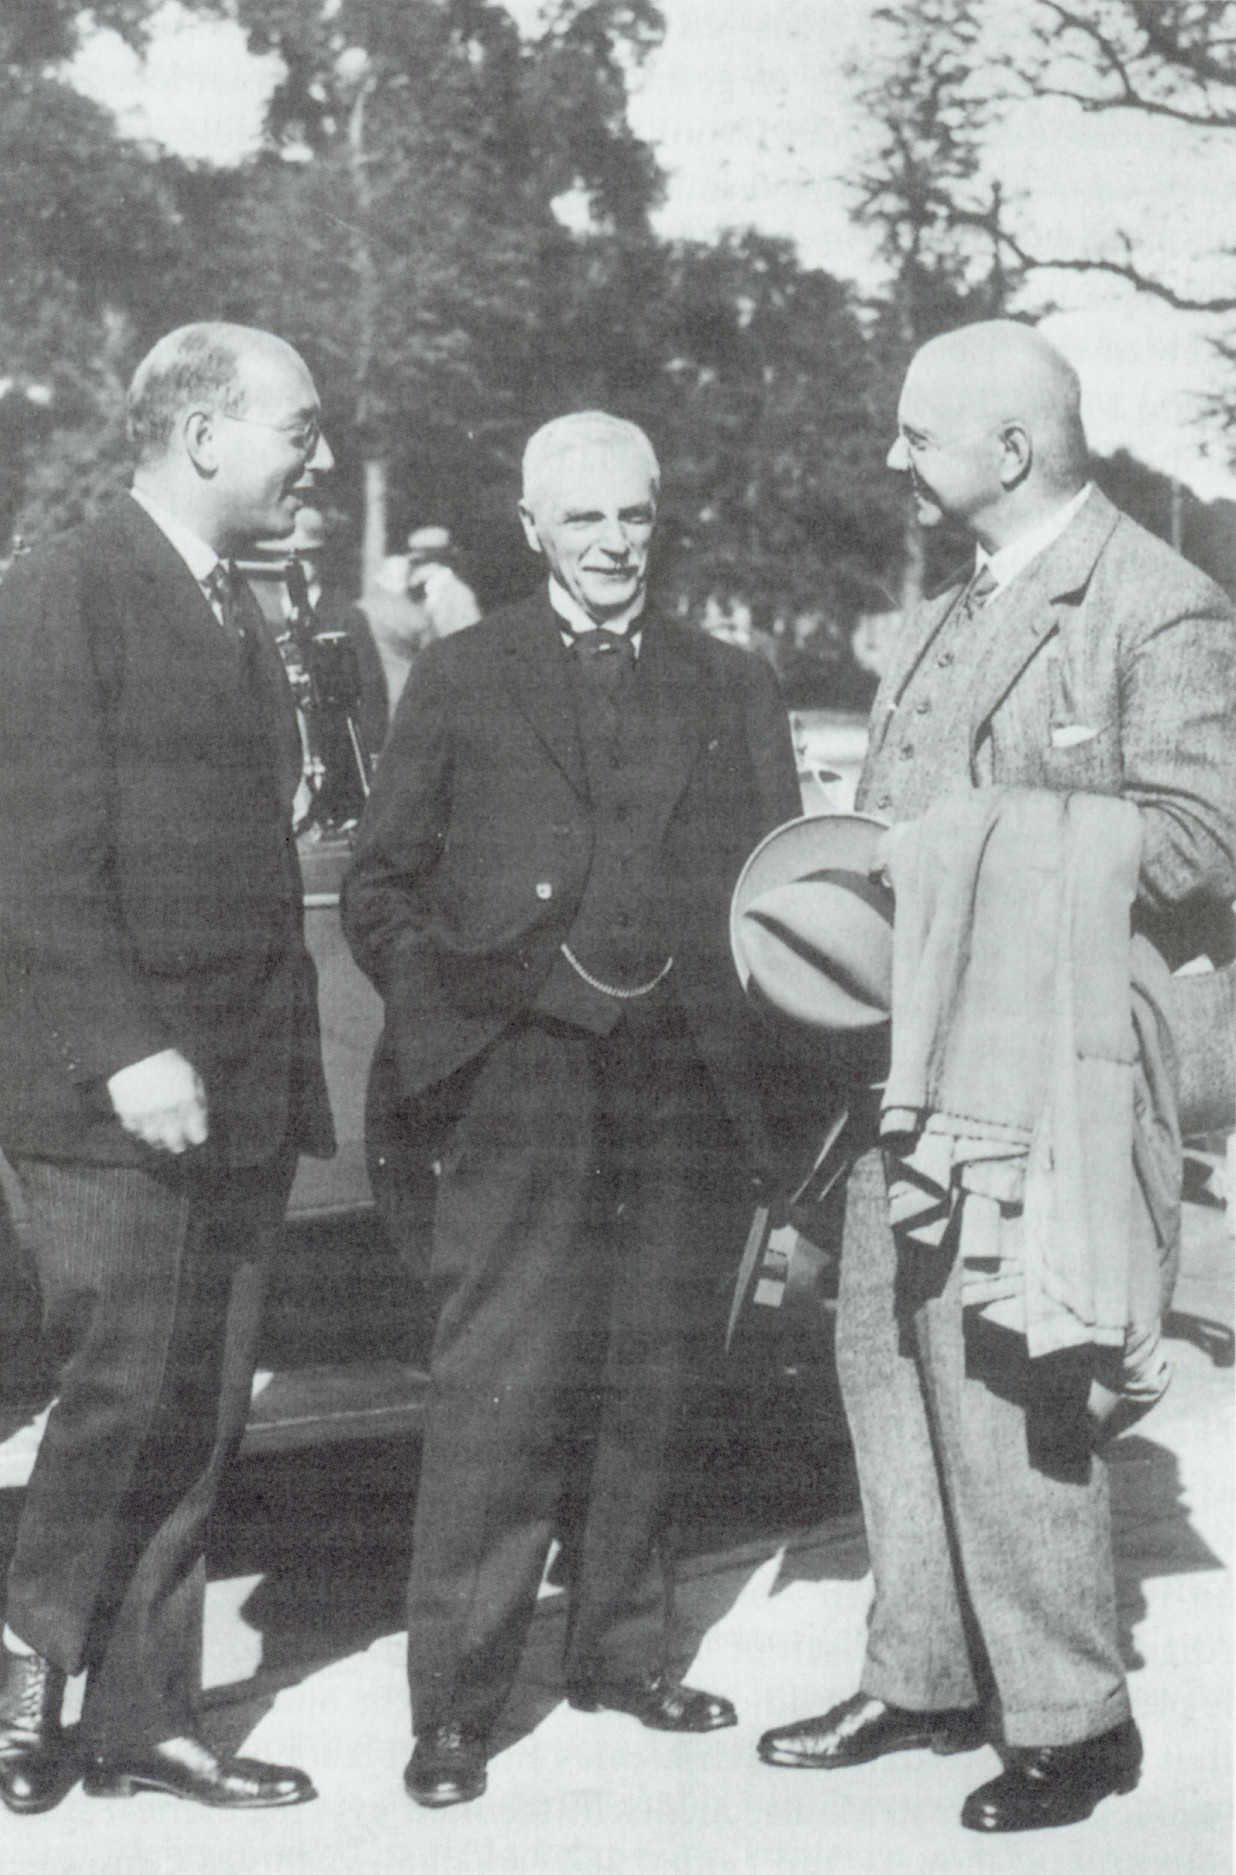 Leonard Polak Daniels with Abraham Hijmans van den Bergh and Isidor Snapper (from right to left) at the 8th (D)GVS Conference © Joodsmonument